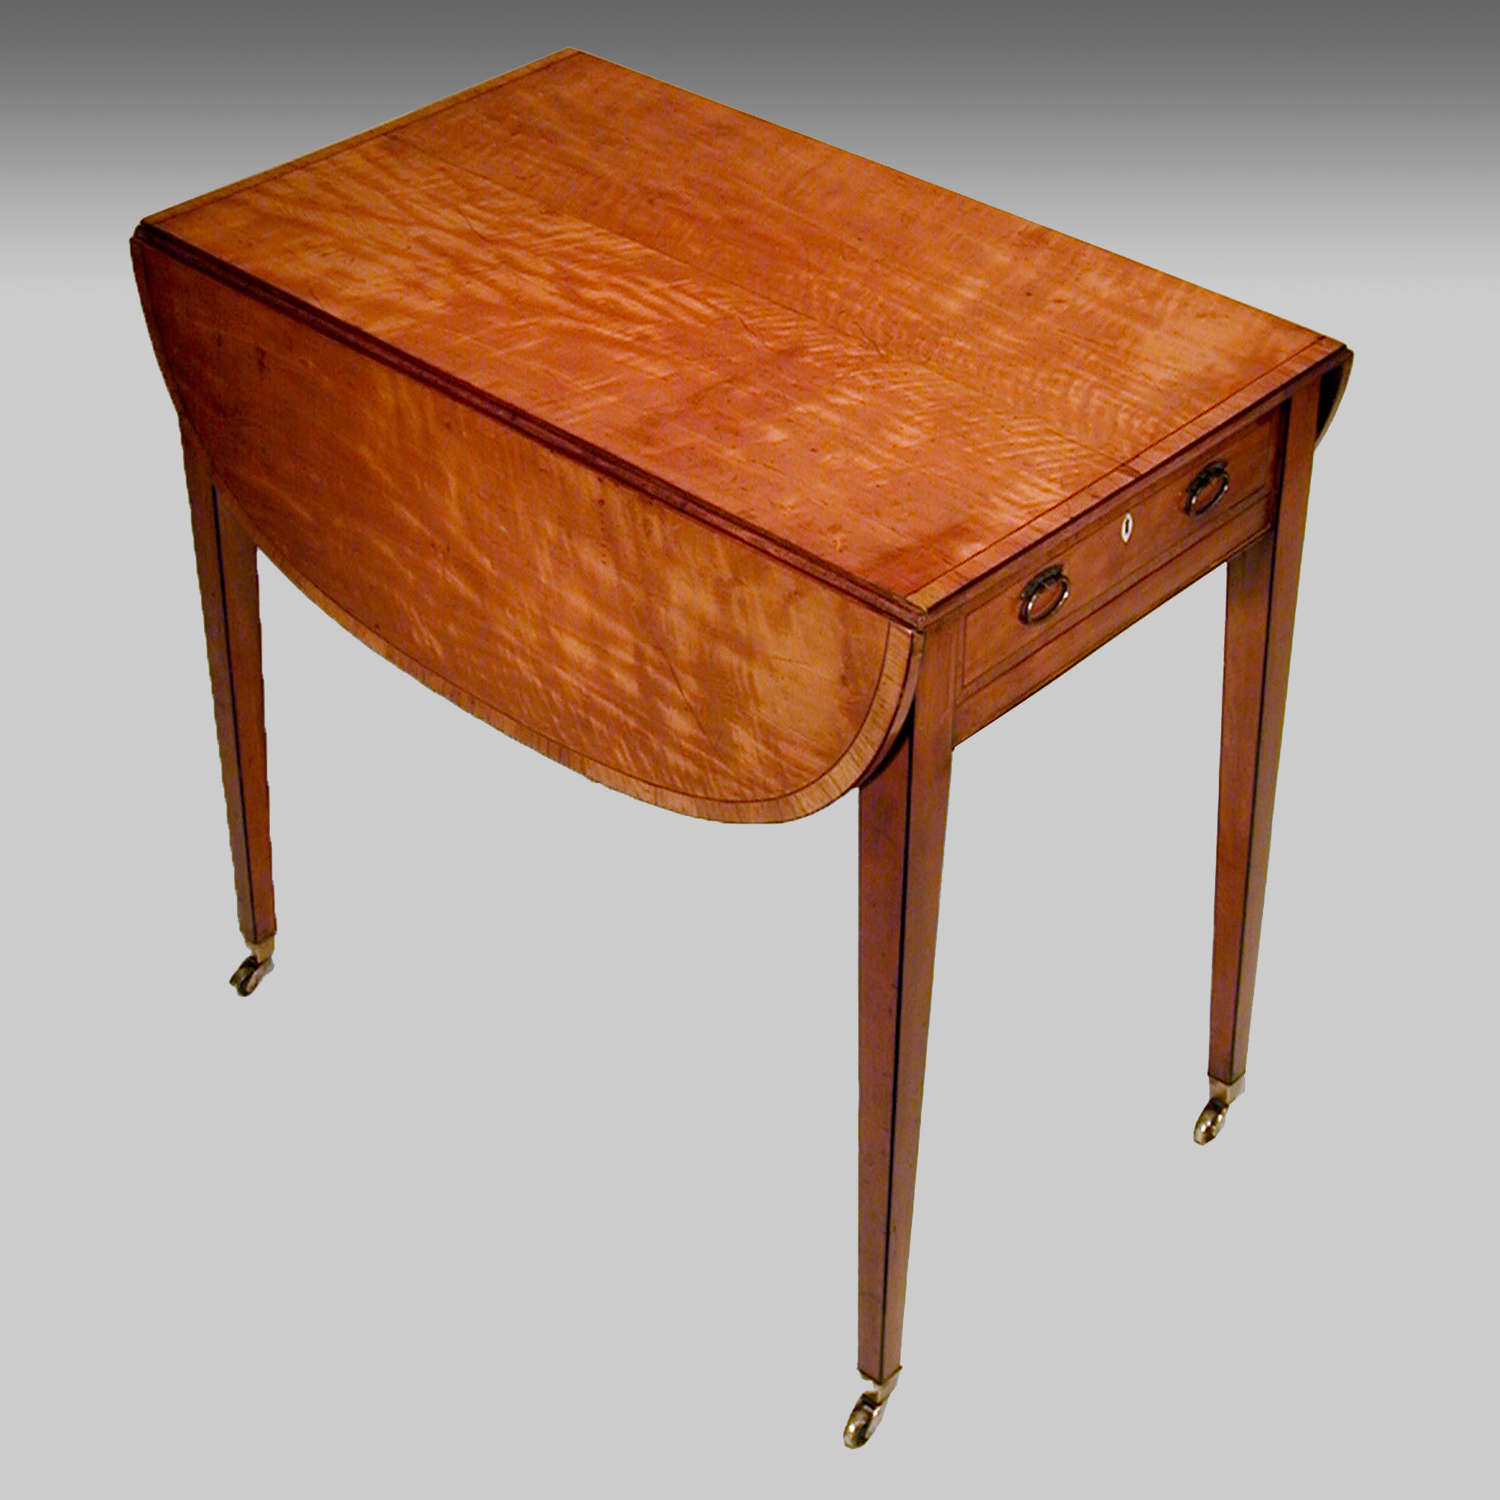 Small 18th century satinwood Pembroke table